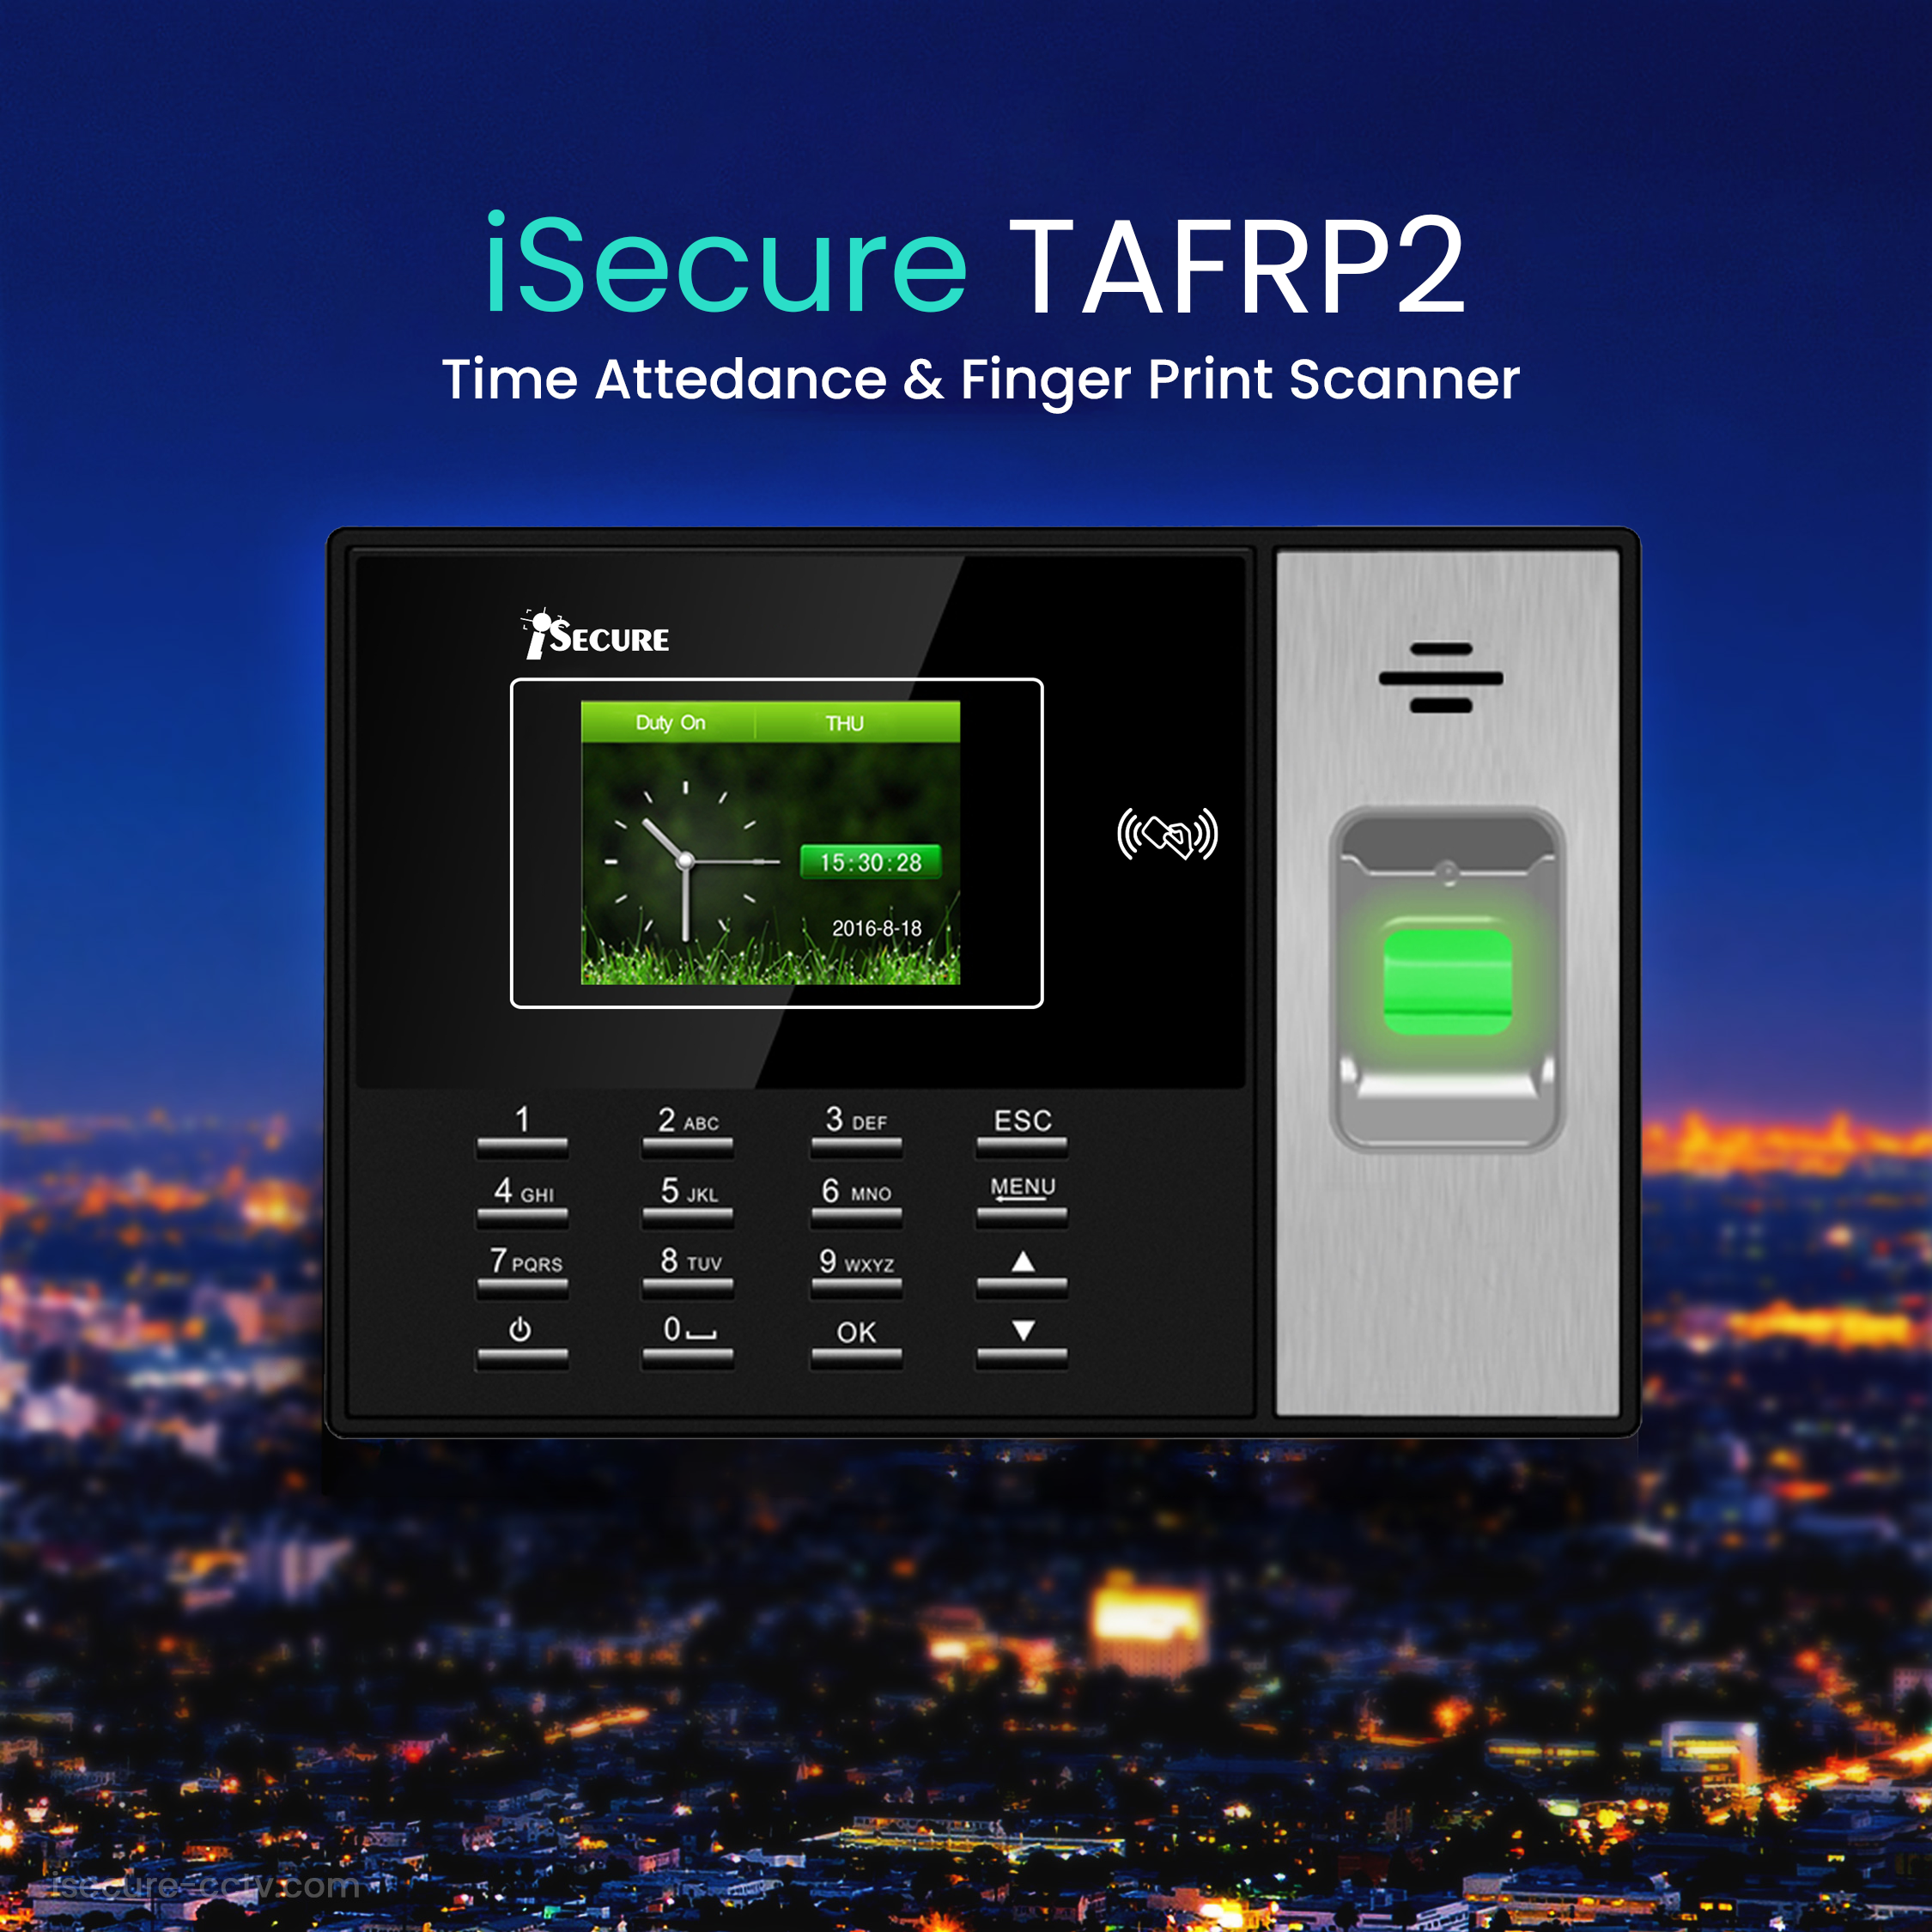 iSecure TAFRP2 Advance Based TCP/IP Time Attendance & Access Control System